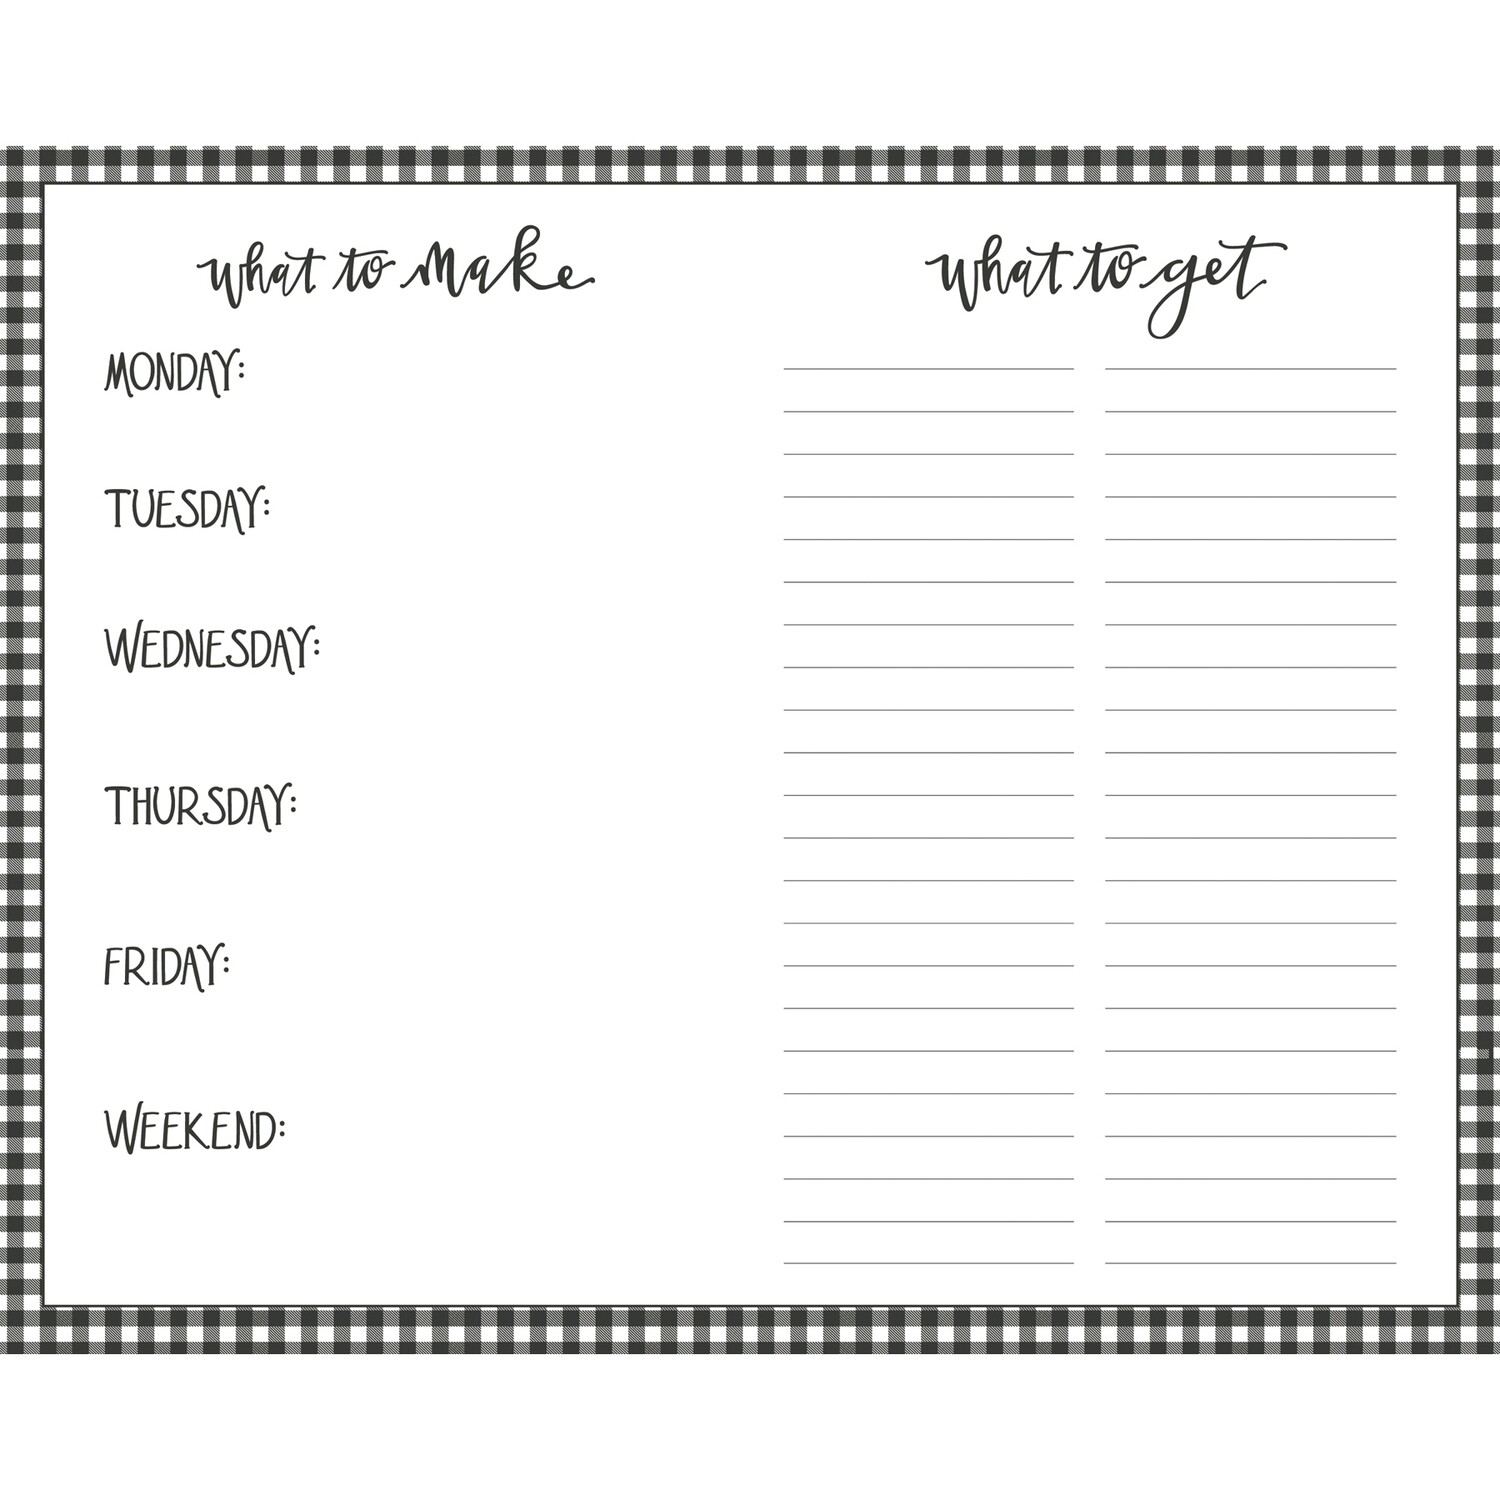 What to Make, What to Get Notepad